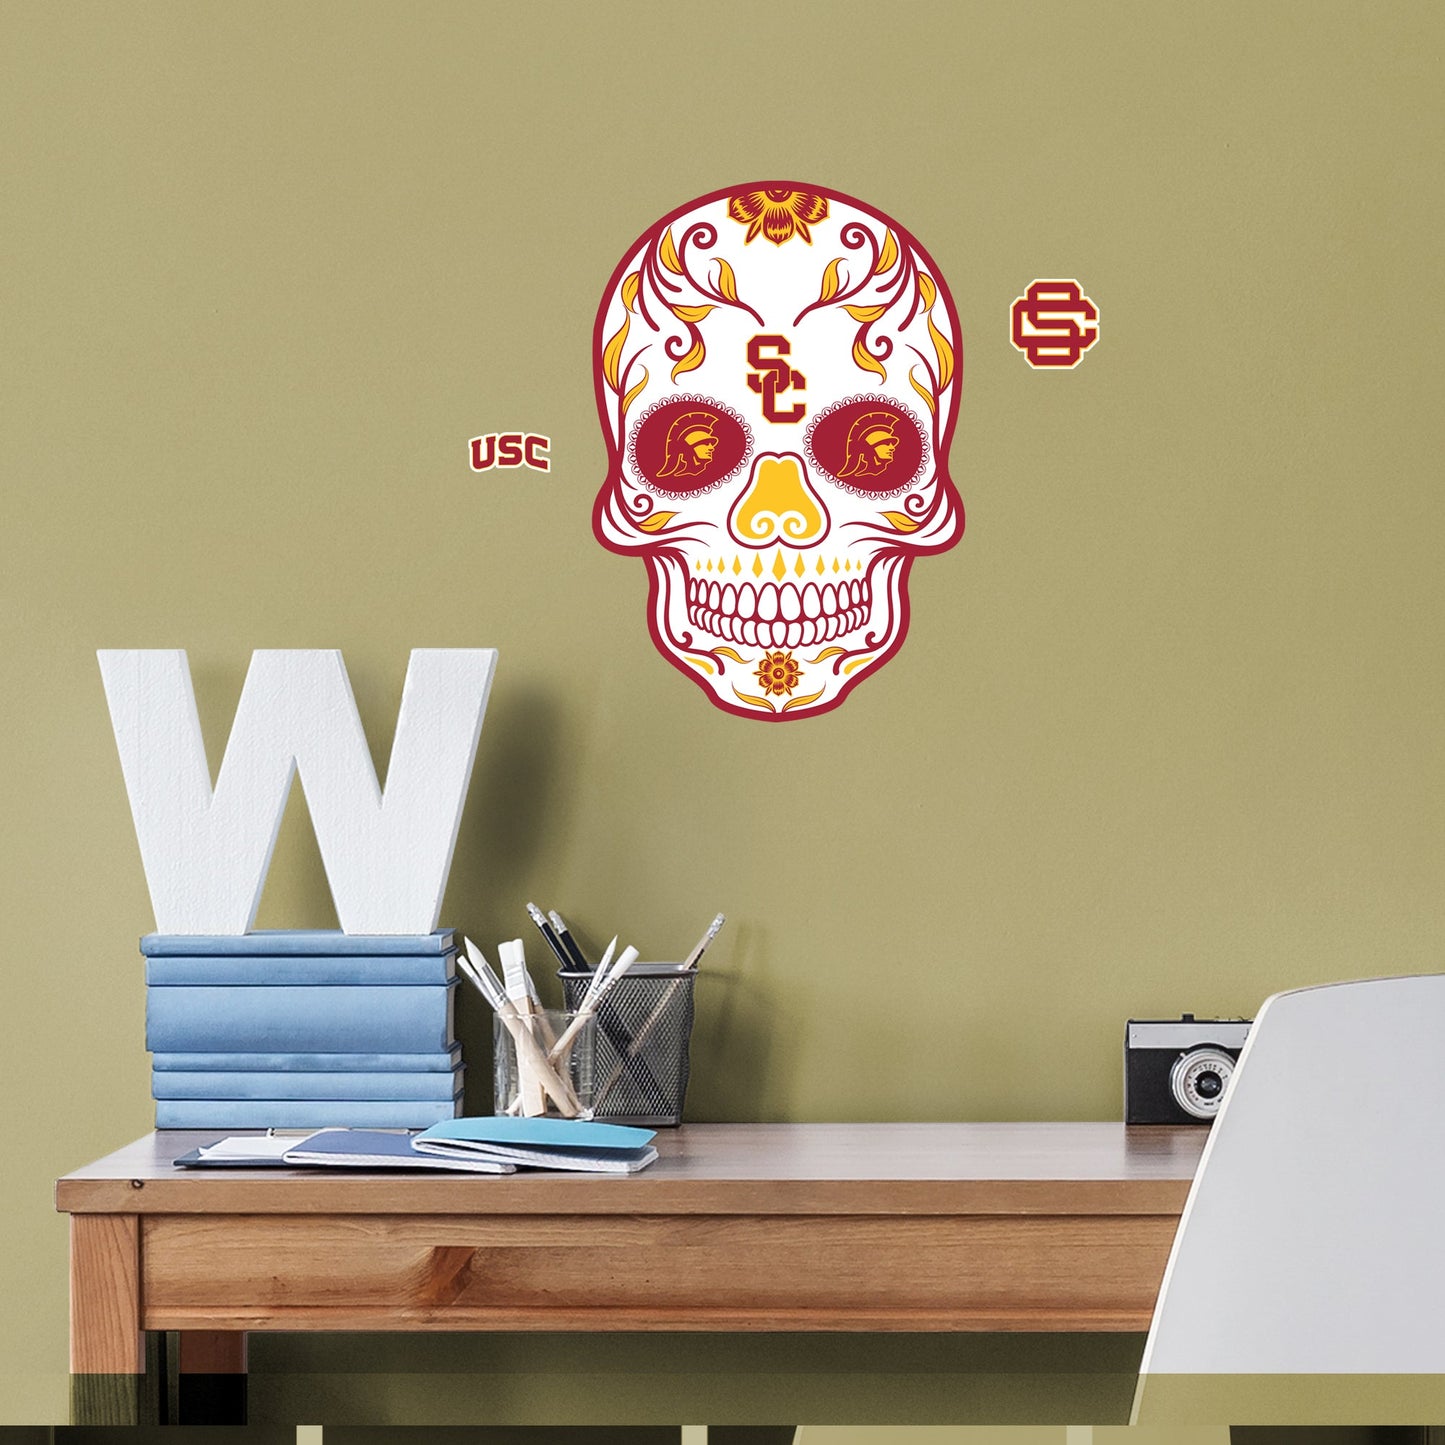 USC Trojans: Skull - Officially Licensed NCAA Removable Adhesive Decal